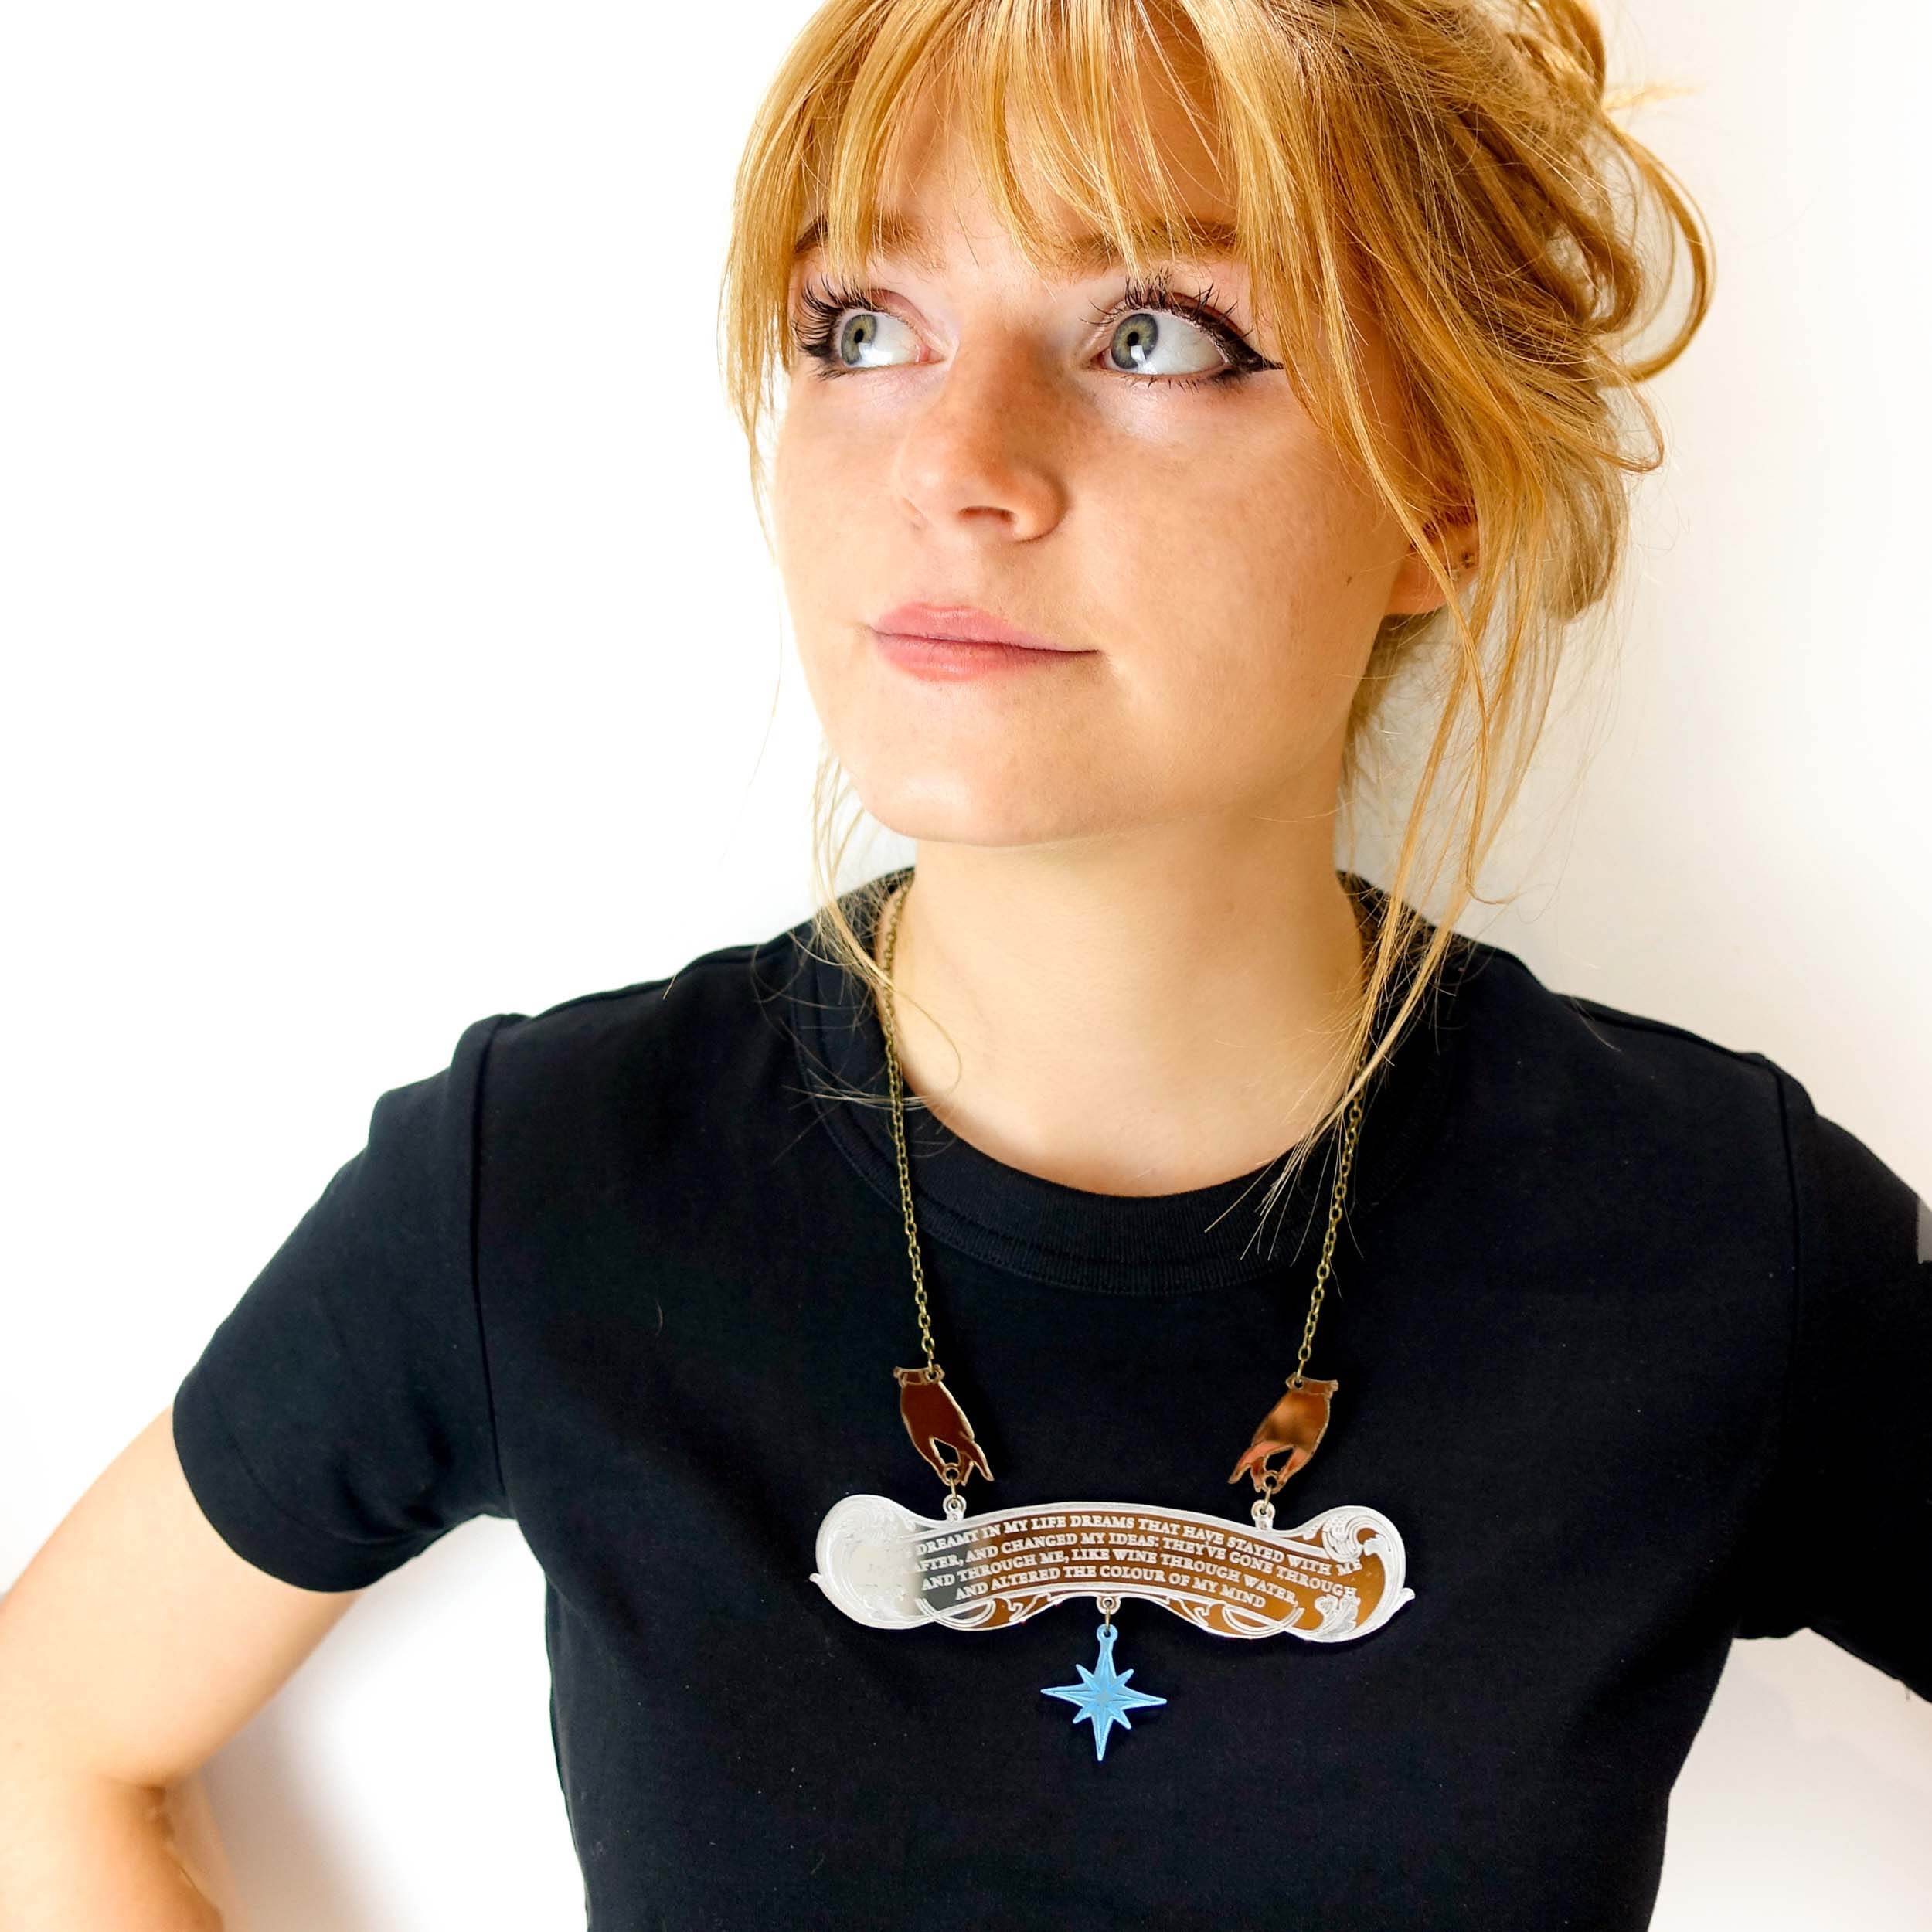 Eliza wears the Wuthering Heights Dreams necklace with a quote from Cathy etched on the silver mirror, held by two hands, and finished with a blue star. 